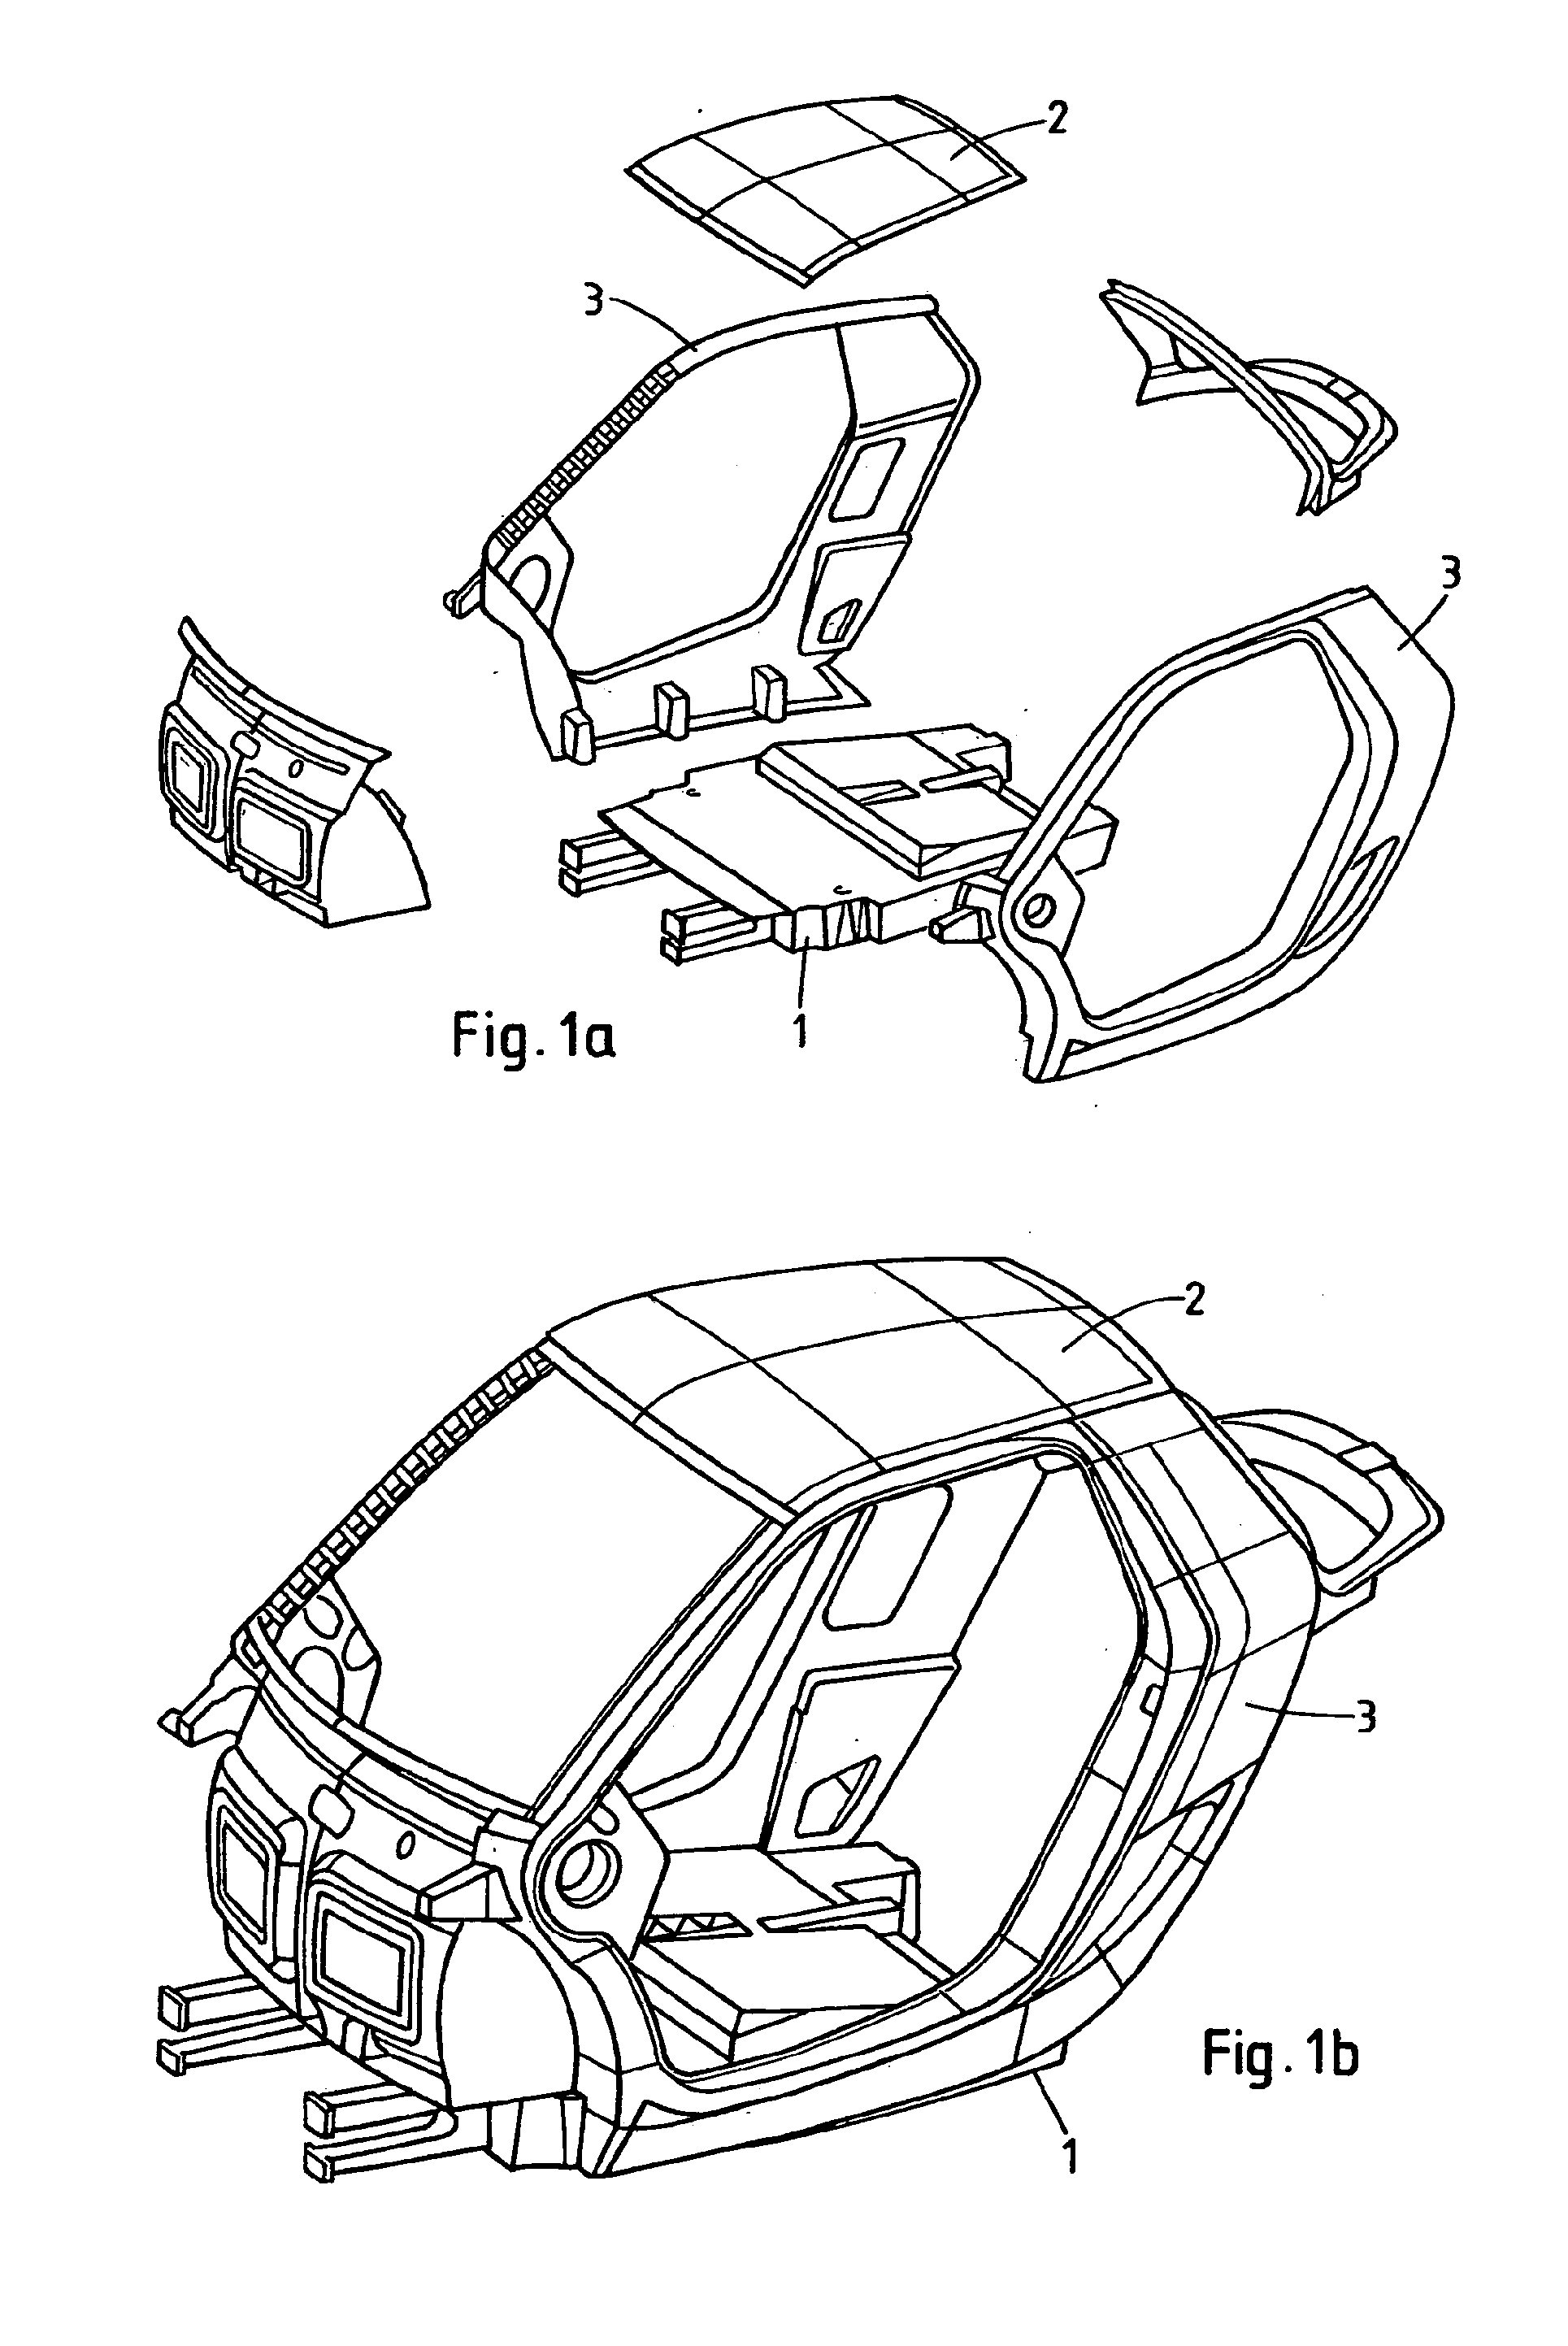 Motor vehicle body for light weight construction